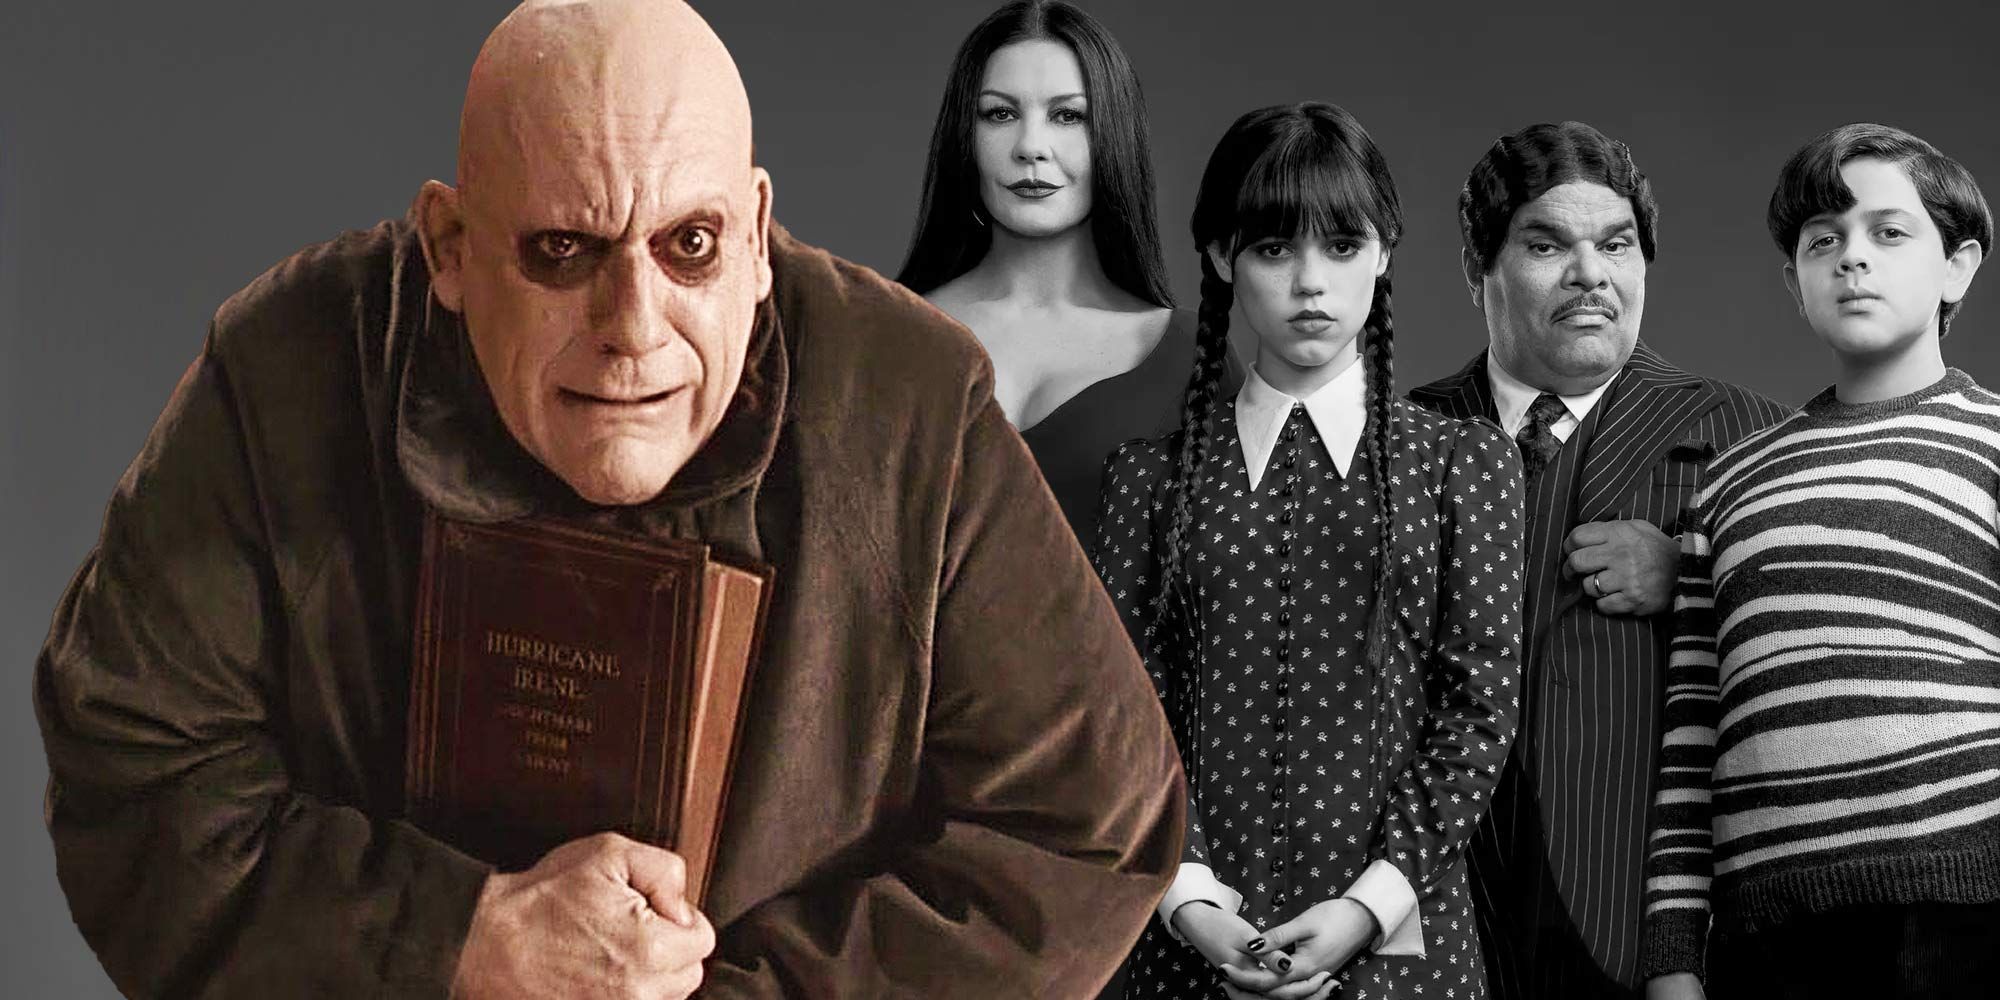 Ubevæbnet offer Teenageår Is Uncle Fester In Wednesday? Why He's Missing In The Trailer